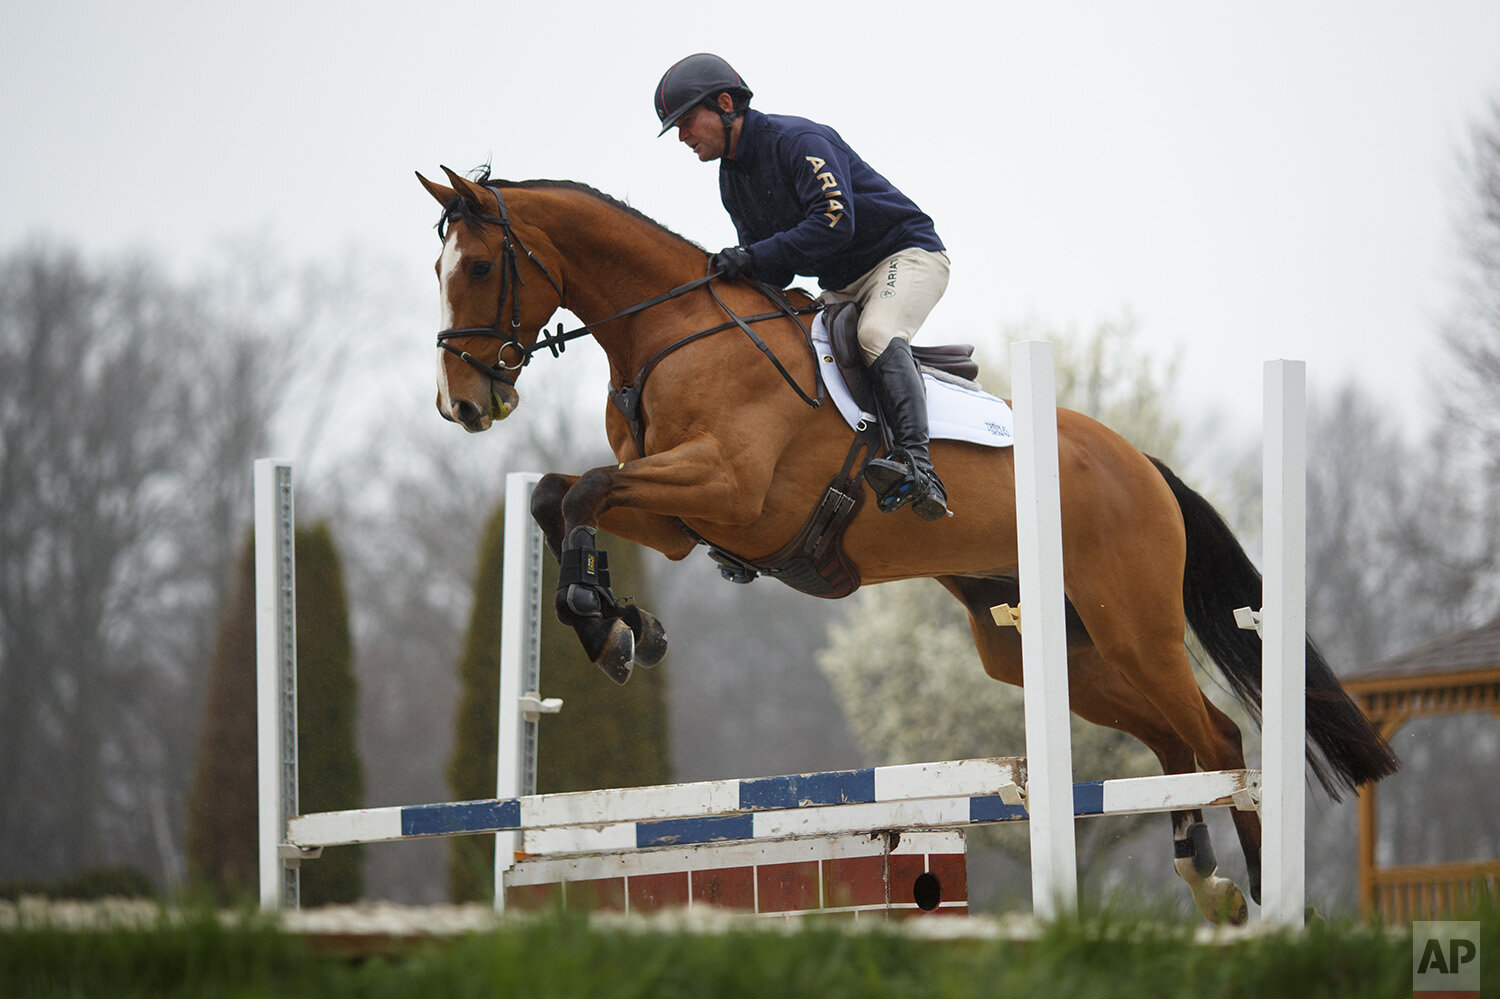  Phillip Dutton, a medal-winning equestrian on the U.S. Olympic team, rides Quasi Cool through a jump during a training session at his farm, Tuesday, March 31, 2020, in West Grove, Pa. (AP Photo/Matt Slocum) 